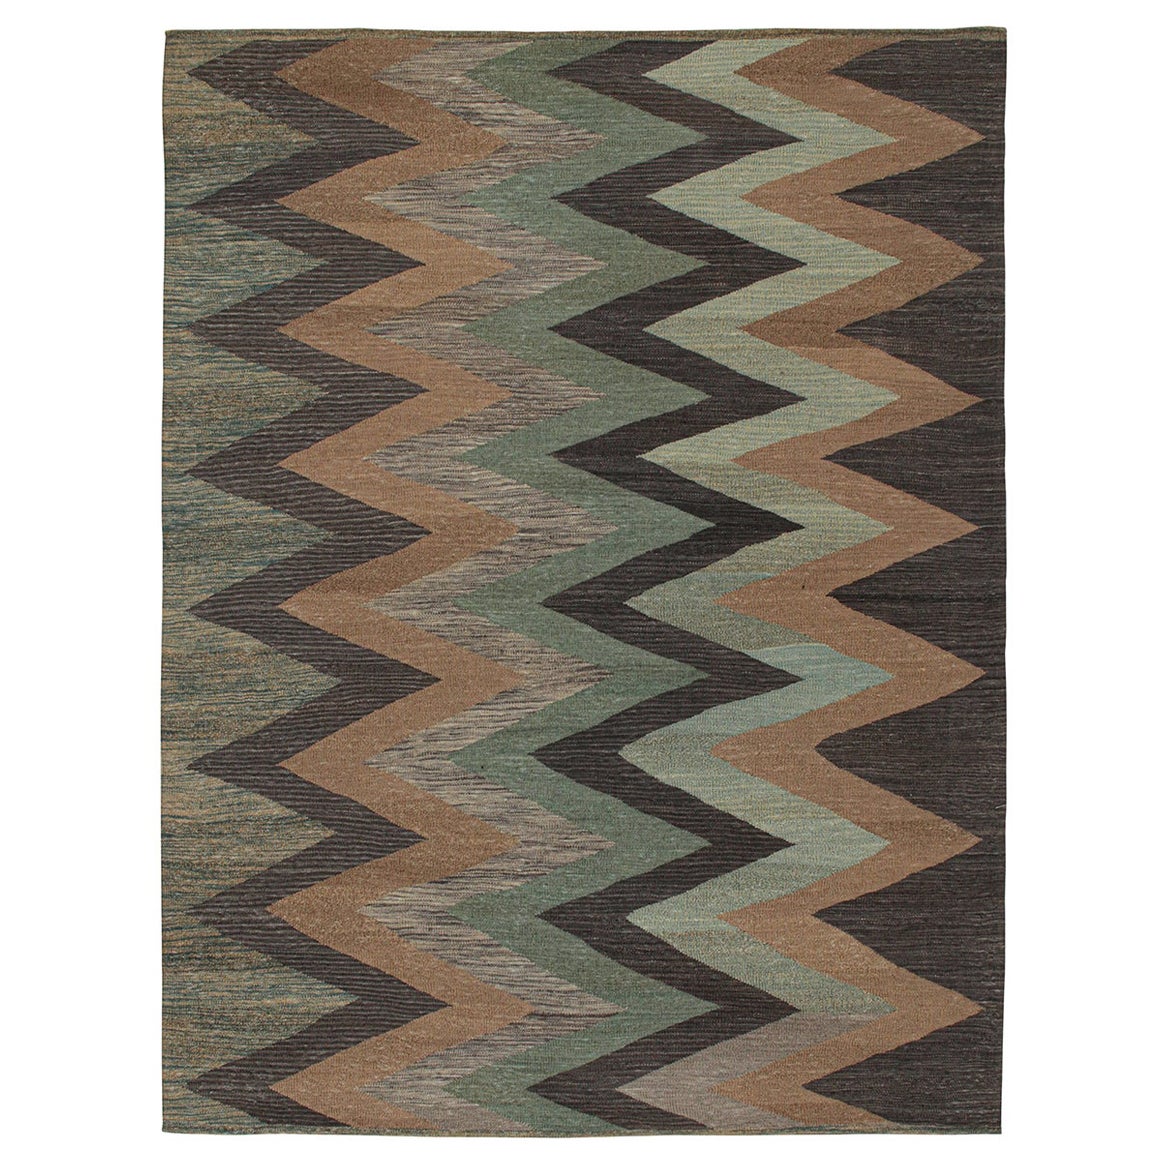 Vintage Persian Kilim in Brown and Teal Chevron Patterns by Rug & Kilim For Sale